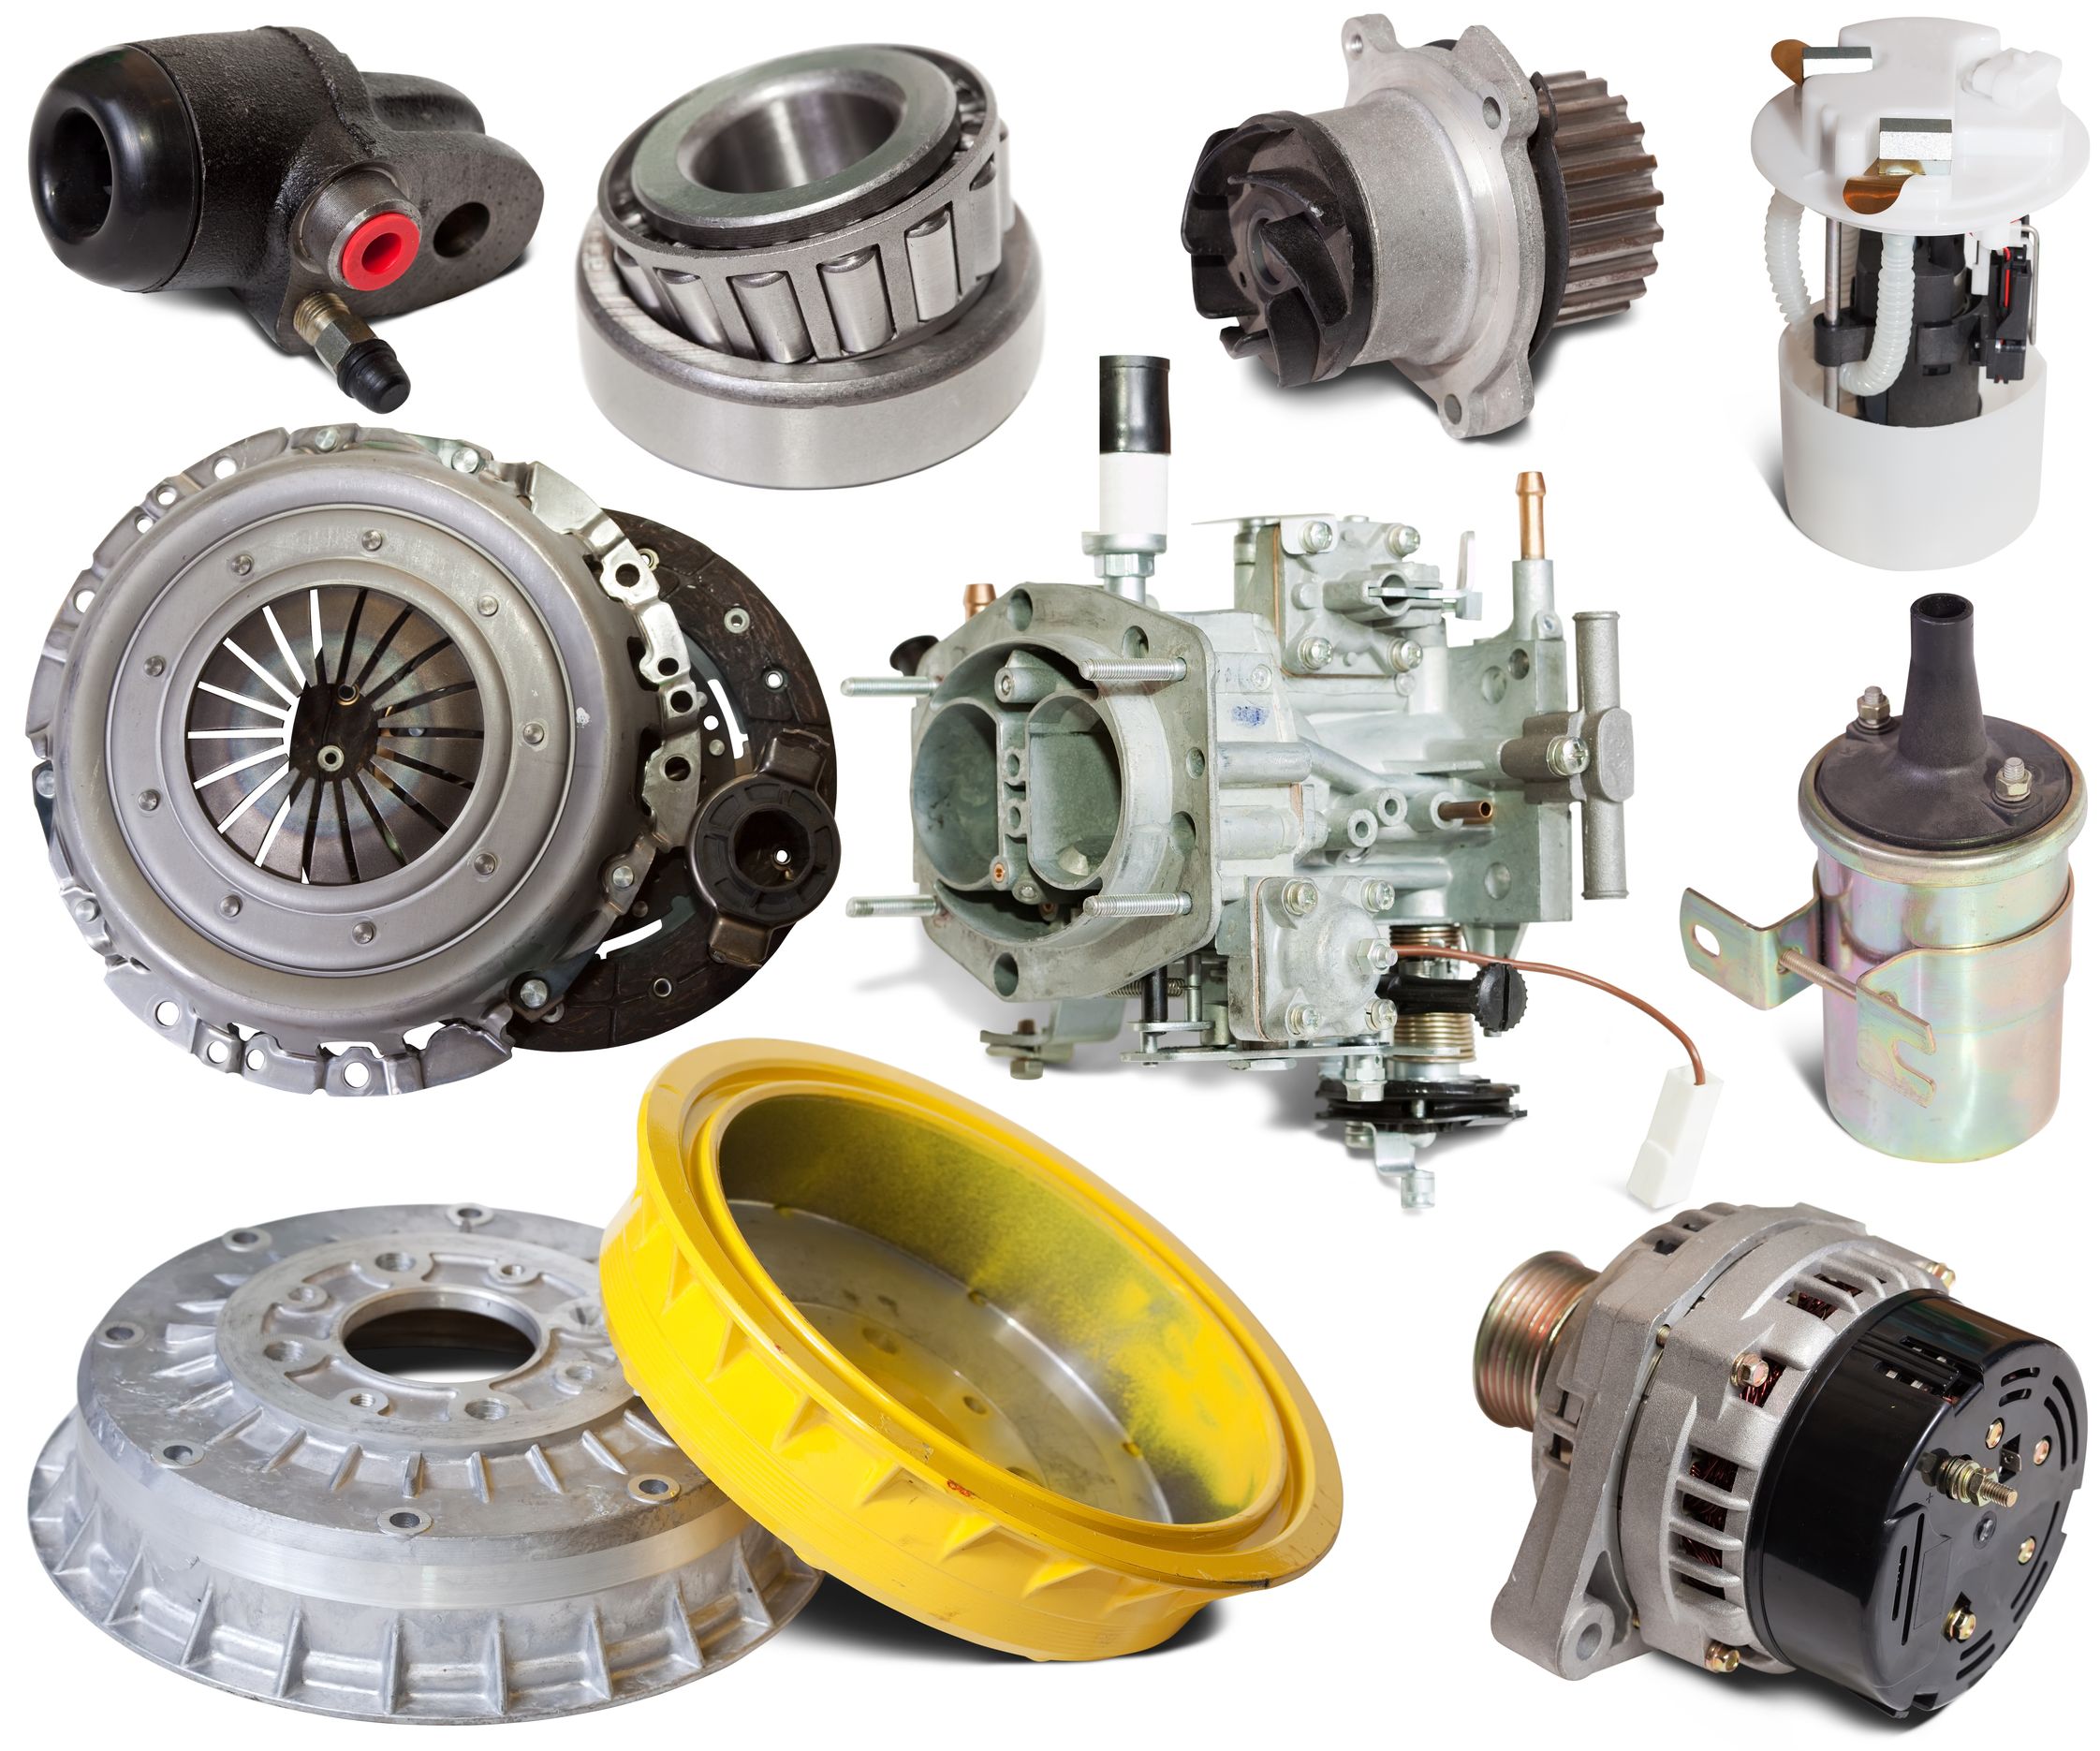 Search Through a Wide Selection of Torque Converter Parts